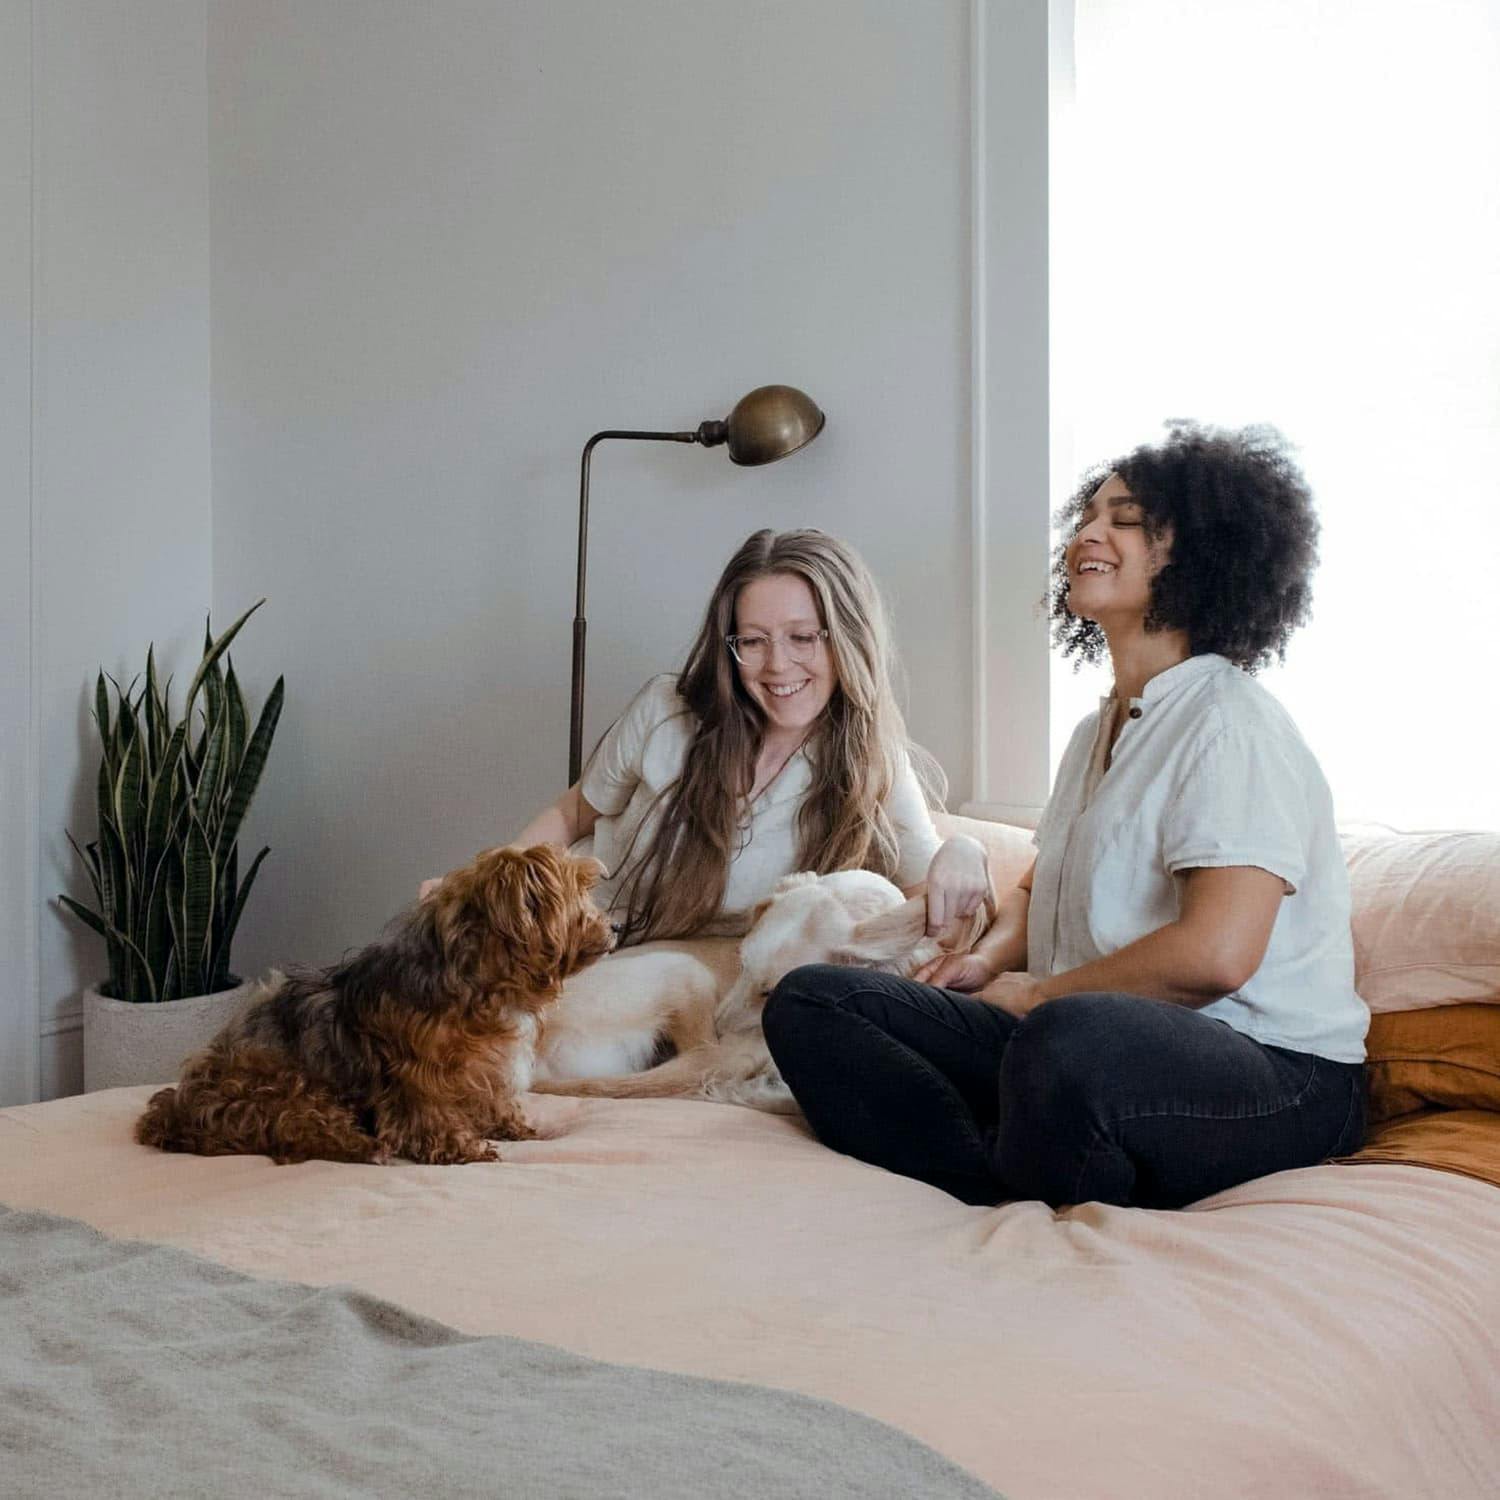 Image of two women on the bed with dog, looking happy.